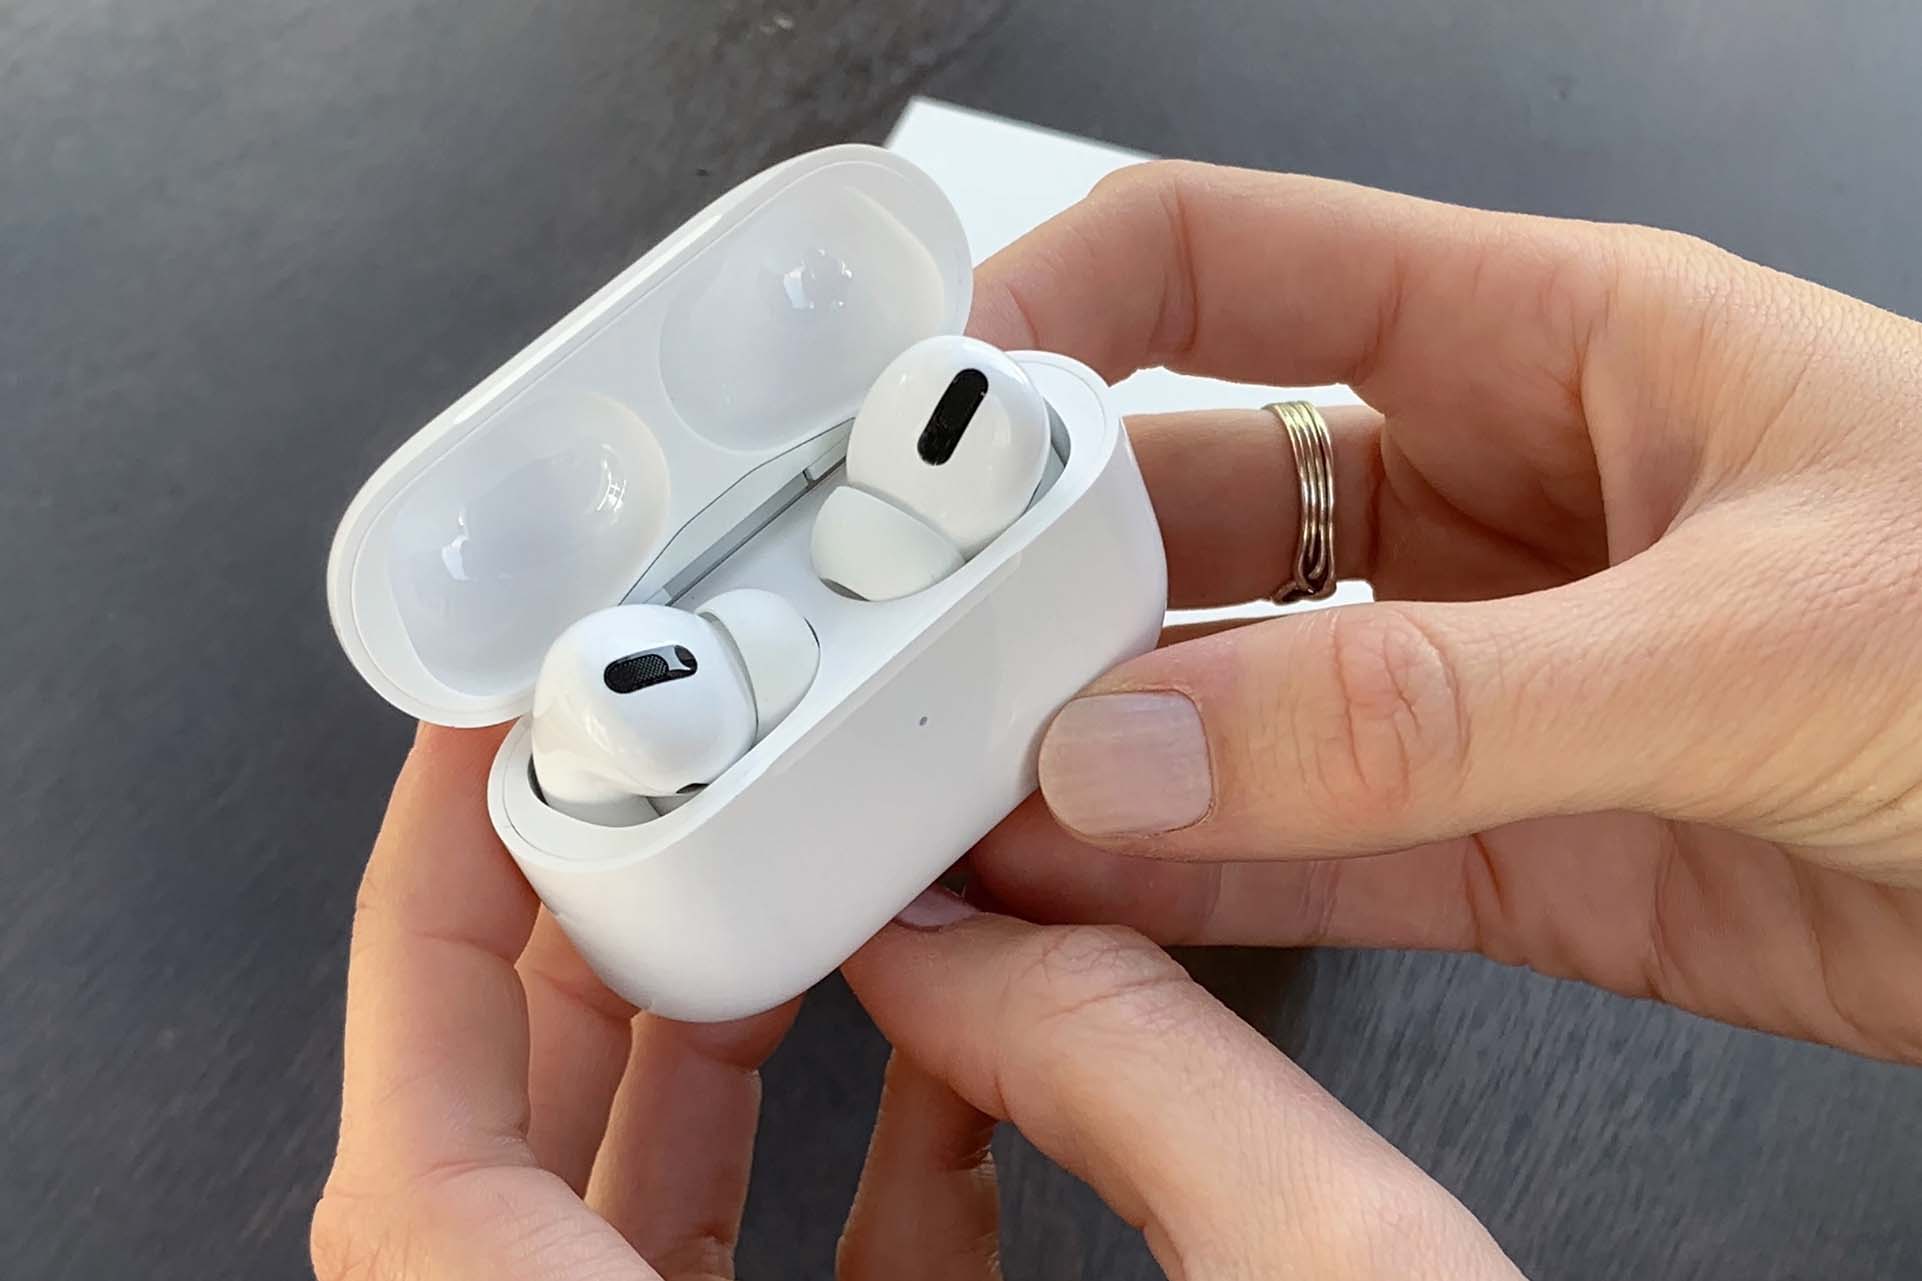 New AirPods anticipated launching in the third quarter as production gets in progress